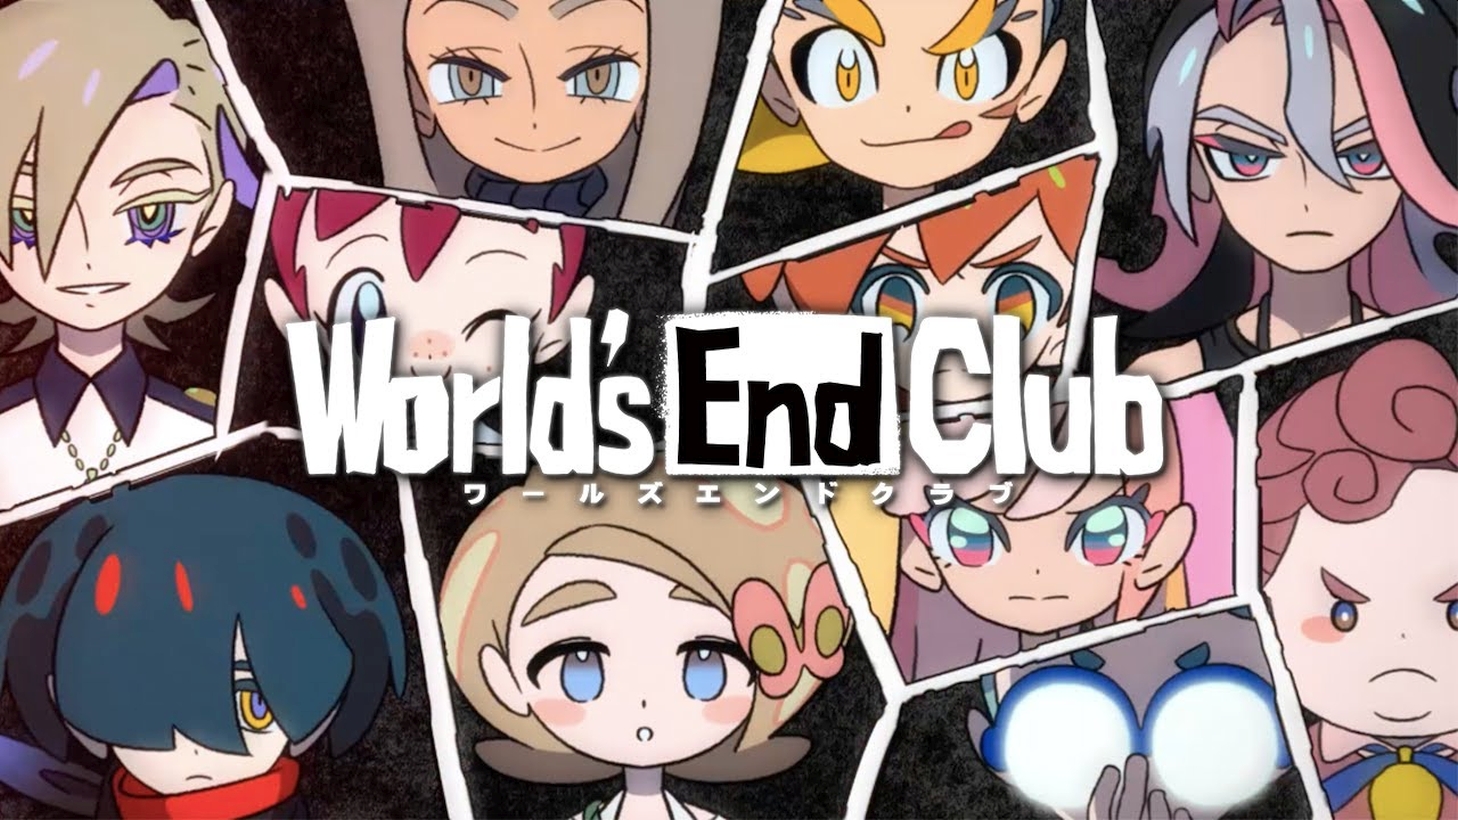 Izanagi Games’ World’s End Club Launches On Apple Arcade But Isn’t The Full Experience